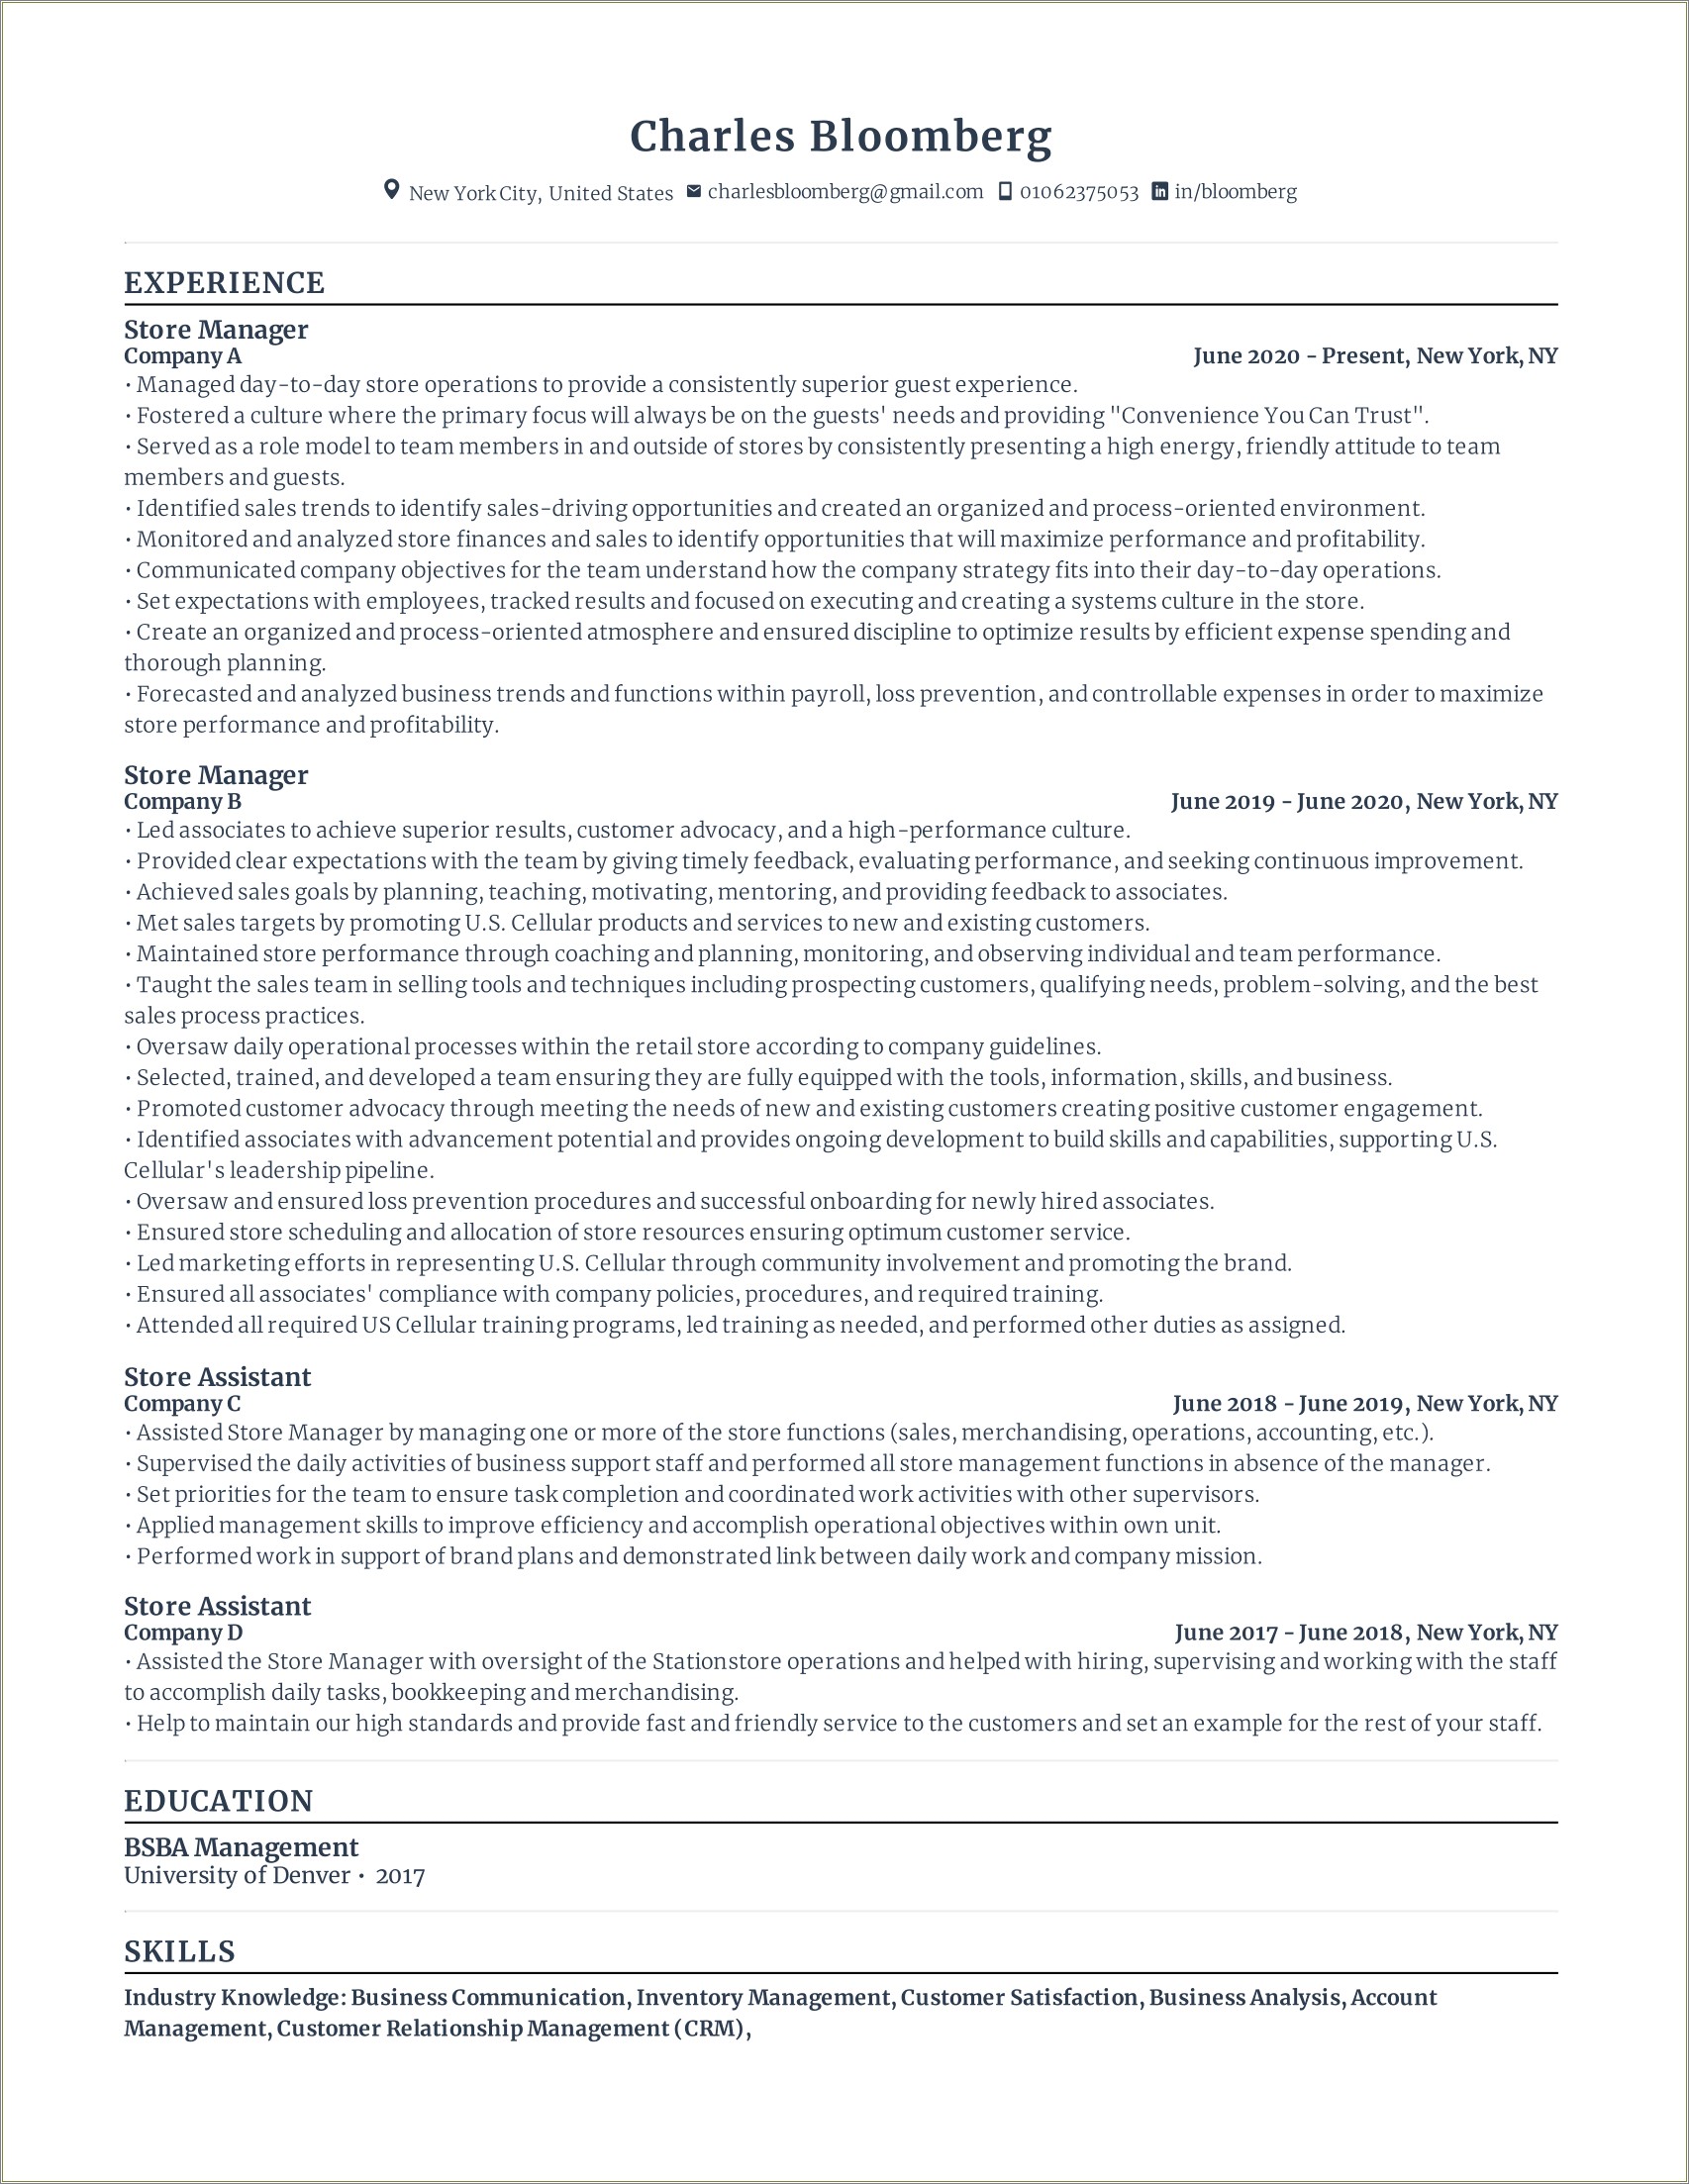 Sample Resume For Store Manager To Business Administration